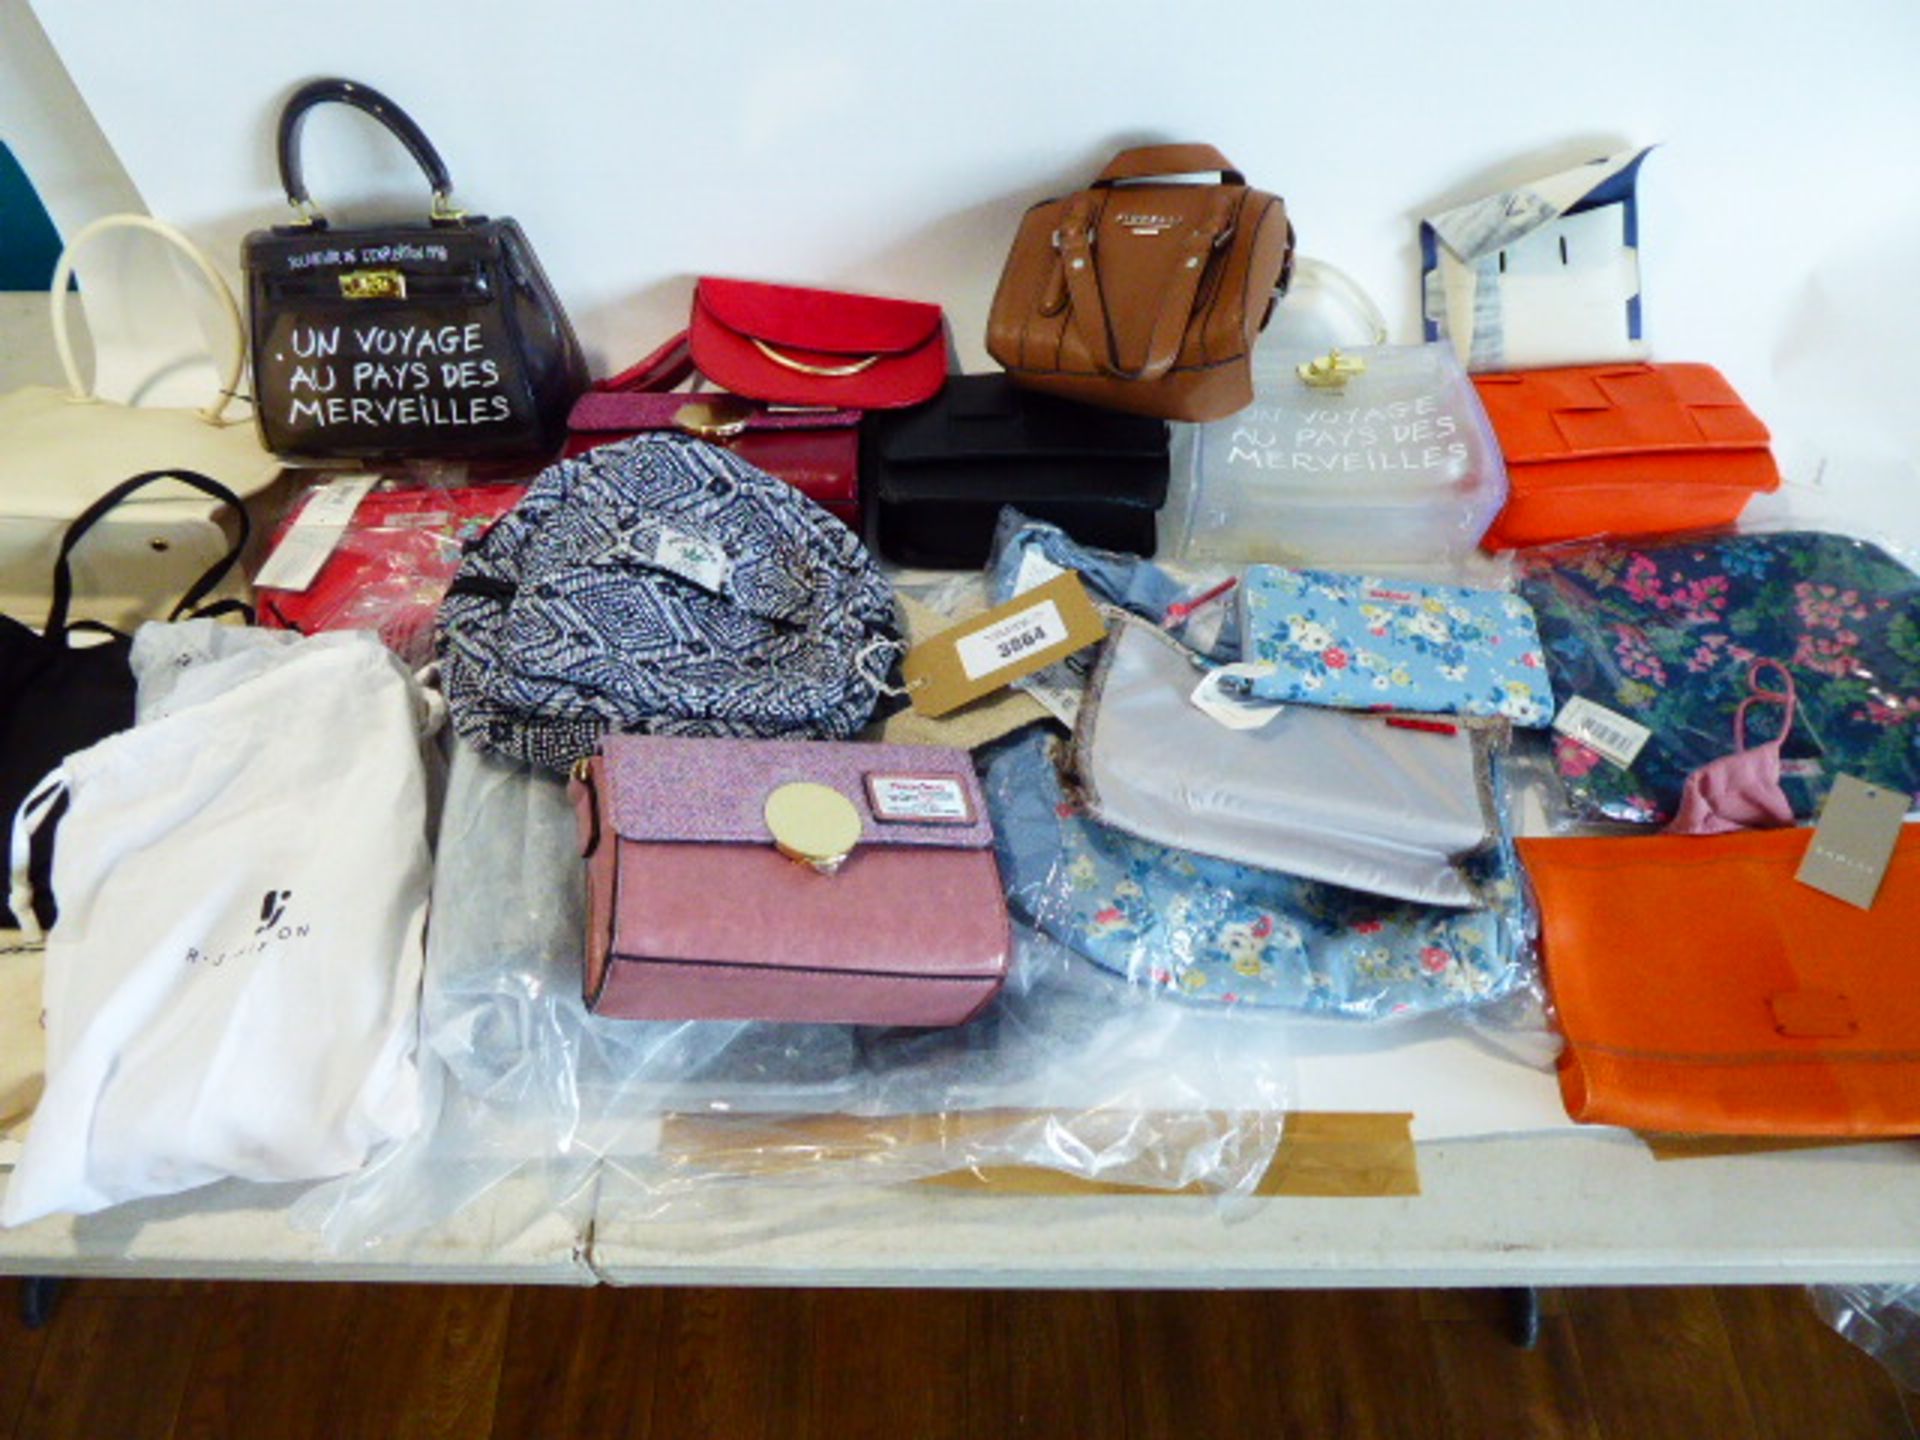 Large bag containing bags in various styles and sizes